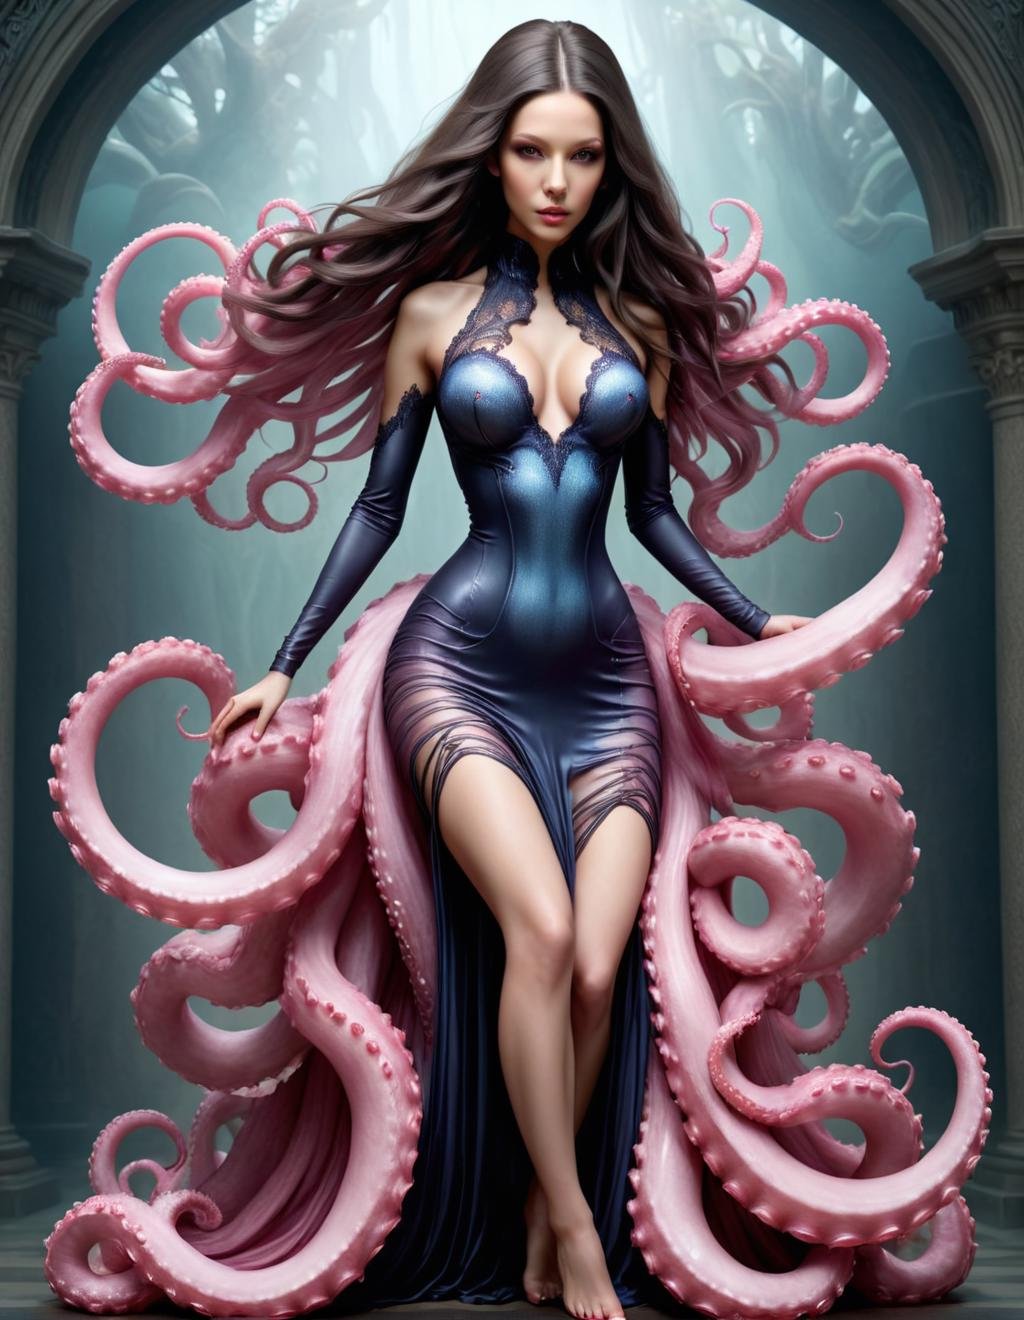 ethereal fantasy concept art of  (Ultrarealistic:1.3) <lora:TentacleFFashion.SFW.FFusion:1>a woman with long hair sitting on a pink octopus, beautiful octopus woman, portrait of an octopus goddess, intricate ornate anime cgi style, some tentacles are touching her, surreal beautiful young woman, octopus goddess, surreal 3 d render, beautiful surreal portrait, intricate realistic fantasy, surreal and fantasy art, inspired by Jean Delville, realistic fantasy illustration fashion dress, blurry background, black hair, Extremely high-resolution details, photographic, realism pushed to extreme, fine texture, incredibly lifelike . Extremely high-resolution details, realism pushed to extreme, fine texture, incredibly lifelike,monster,ugly,surgery,evisceration,morbid,cut,open,rotten,mutilated,deformed,disfigured,malformed,missing limbs,extra limbs,bloody,slimy,goo,Richard Estes,Audrey Flack,Ralph Goings,Robert Bechtle,Tomasz Alen Kopera,H.R.Giger,Joel Boucquemont,ArtStation,DeviantArt contest winner,thematic background . magnificent, celestial, ethereal, painterly, epic, majestic, magical, fantasy art, cover art, dreamy